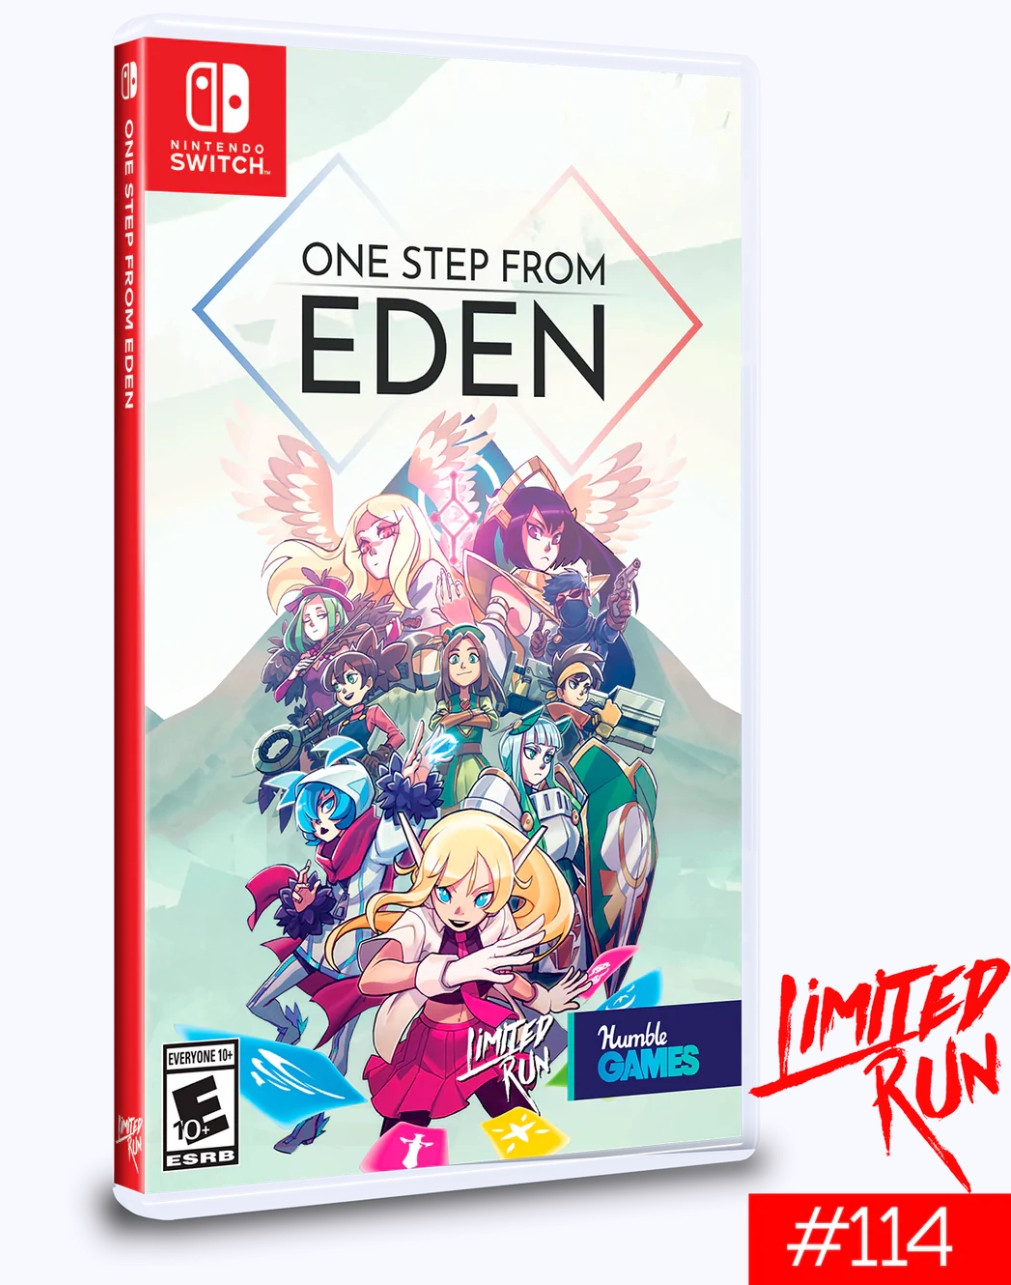 One Step From Eden (Limited Run Games) - Nintendo Switch